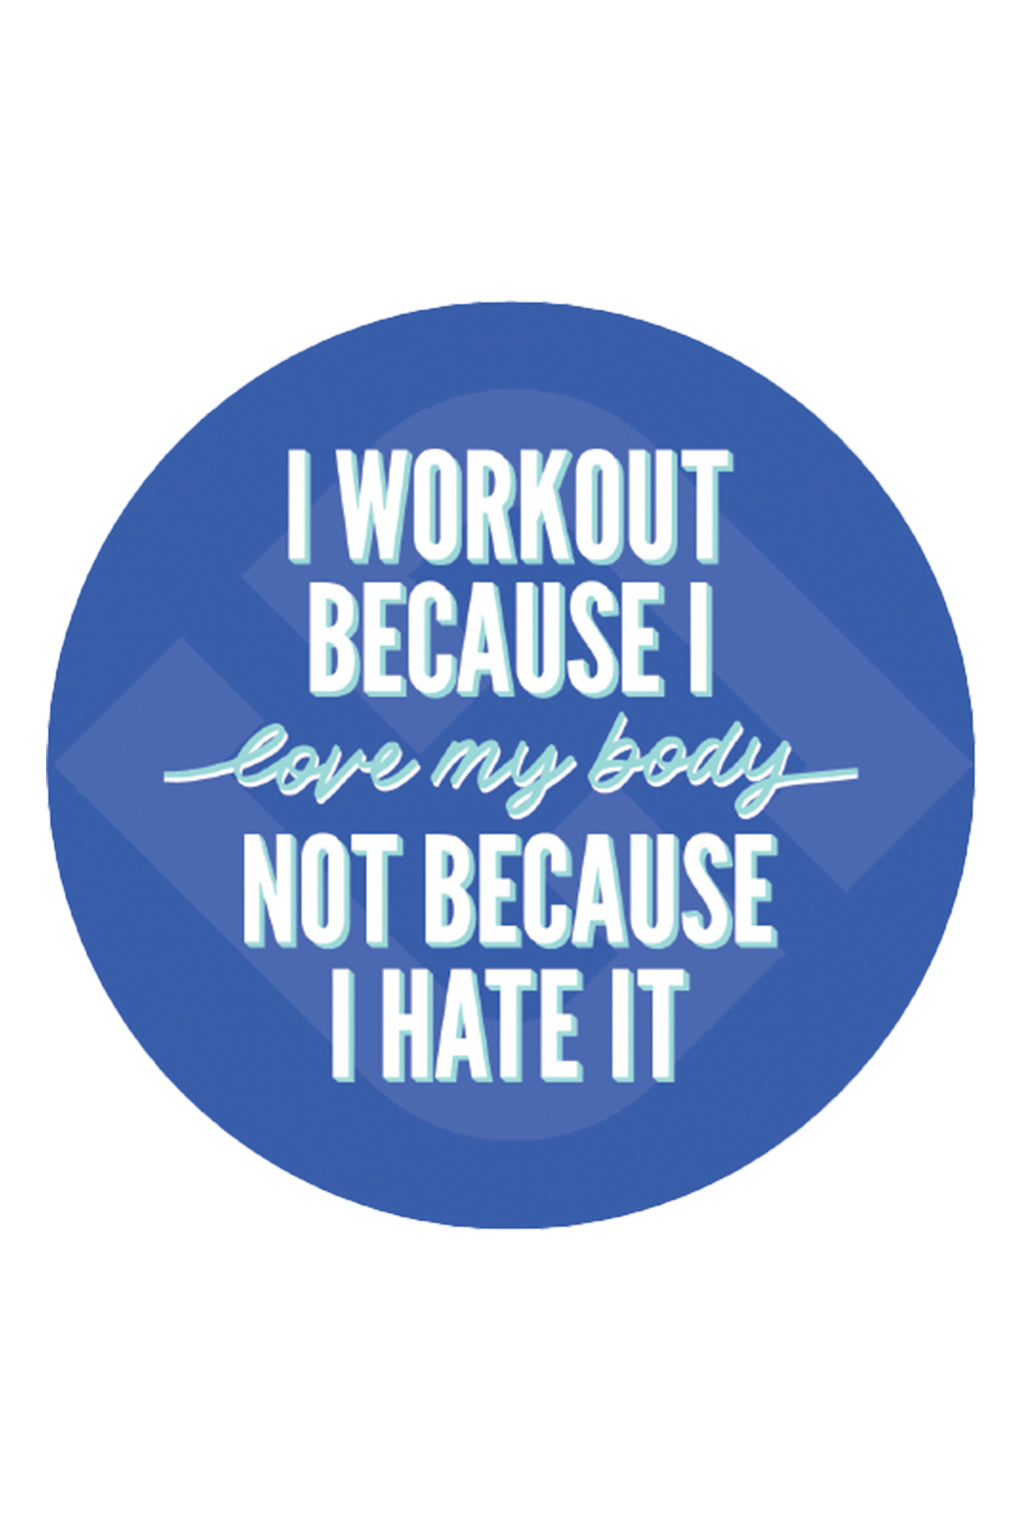 3" Round Blue Vinyl Sticker that says "I workout because I Love my Body not because I hate it"